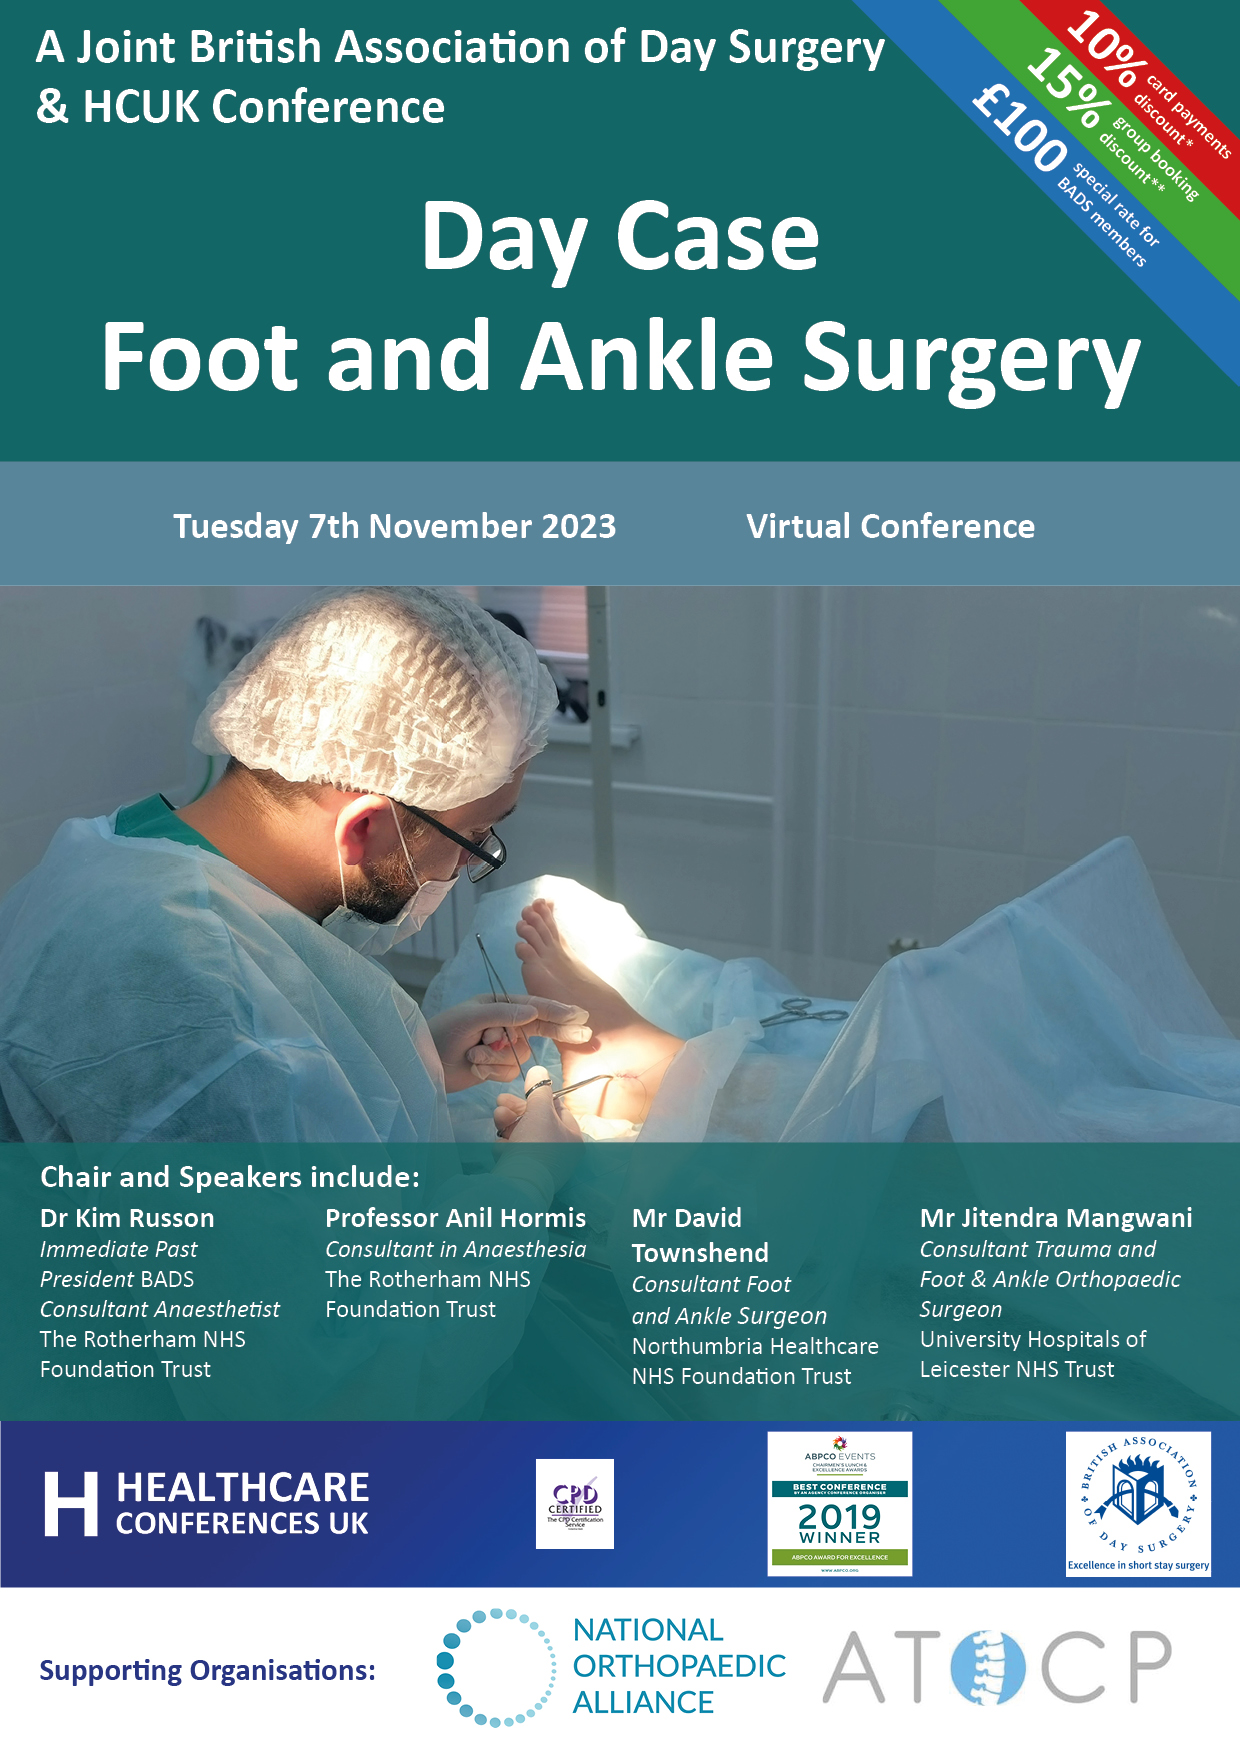 Day Case Foot and Ankle Surgery BADS conference